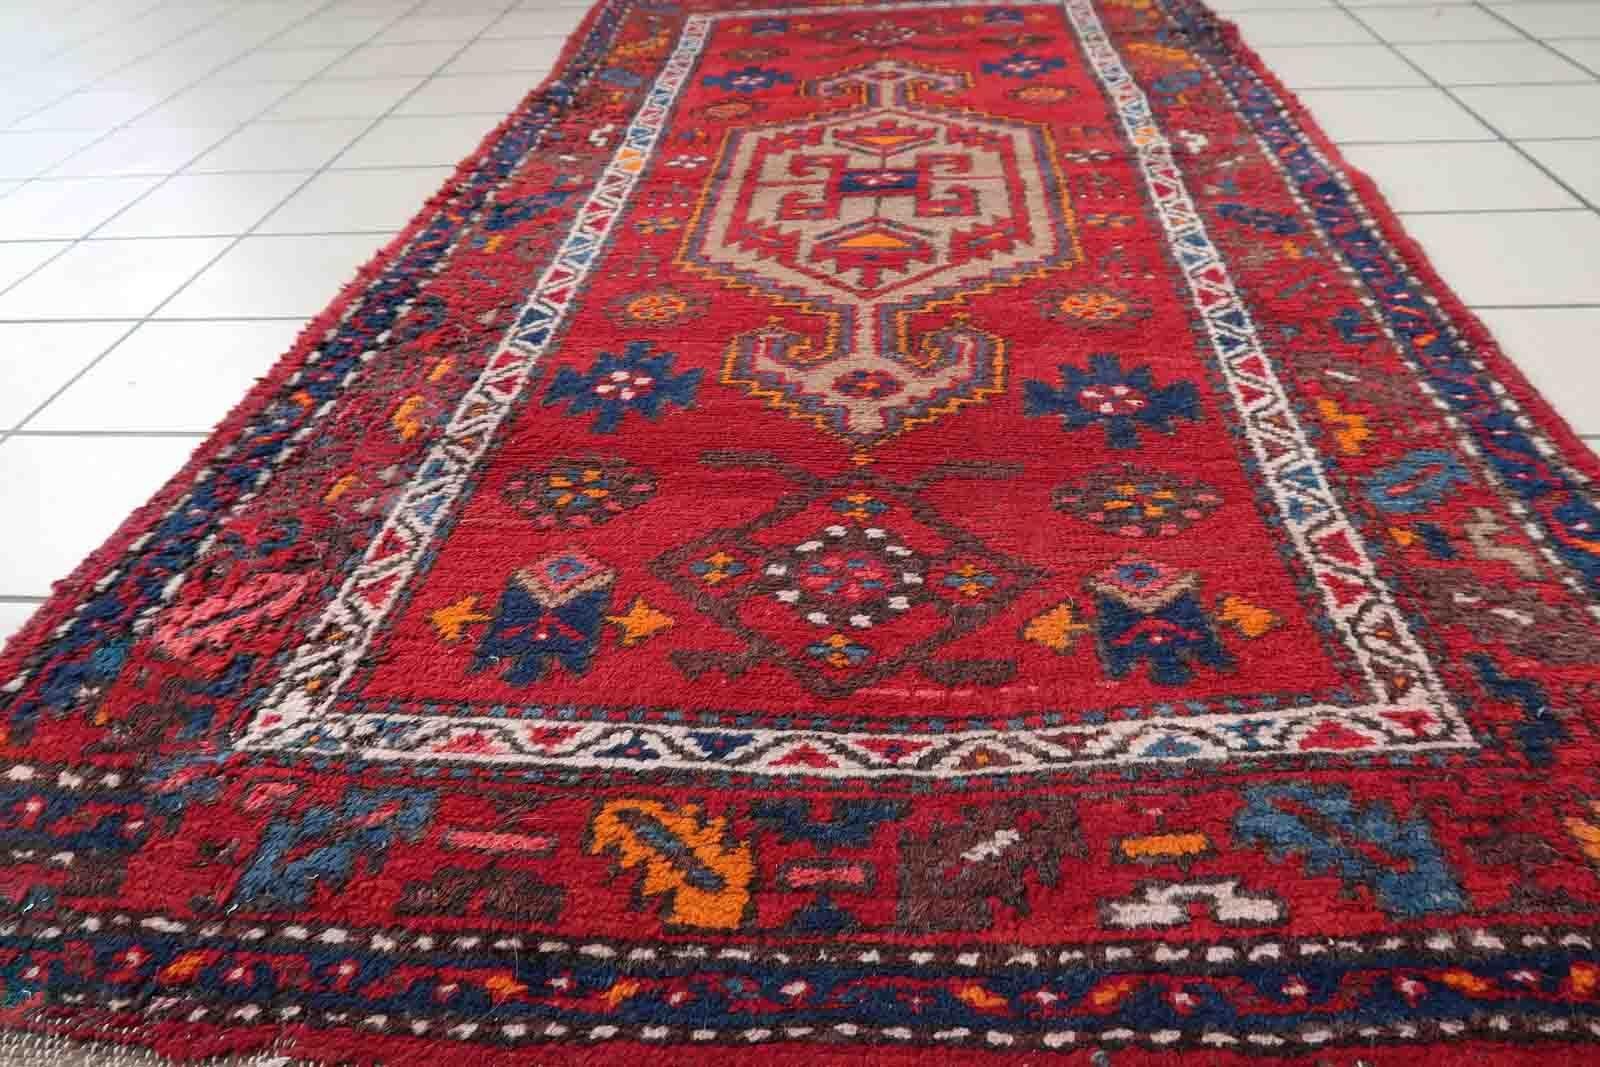 Handmade vintage Hamadan rug in bright red color with large medallion. The rug is from the end of 20th century in original condition, it has some low pile.

-condition: some low pile,

-circa: 1970s,

-size: 3.2' x 6.2' (100cm x